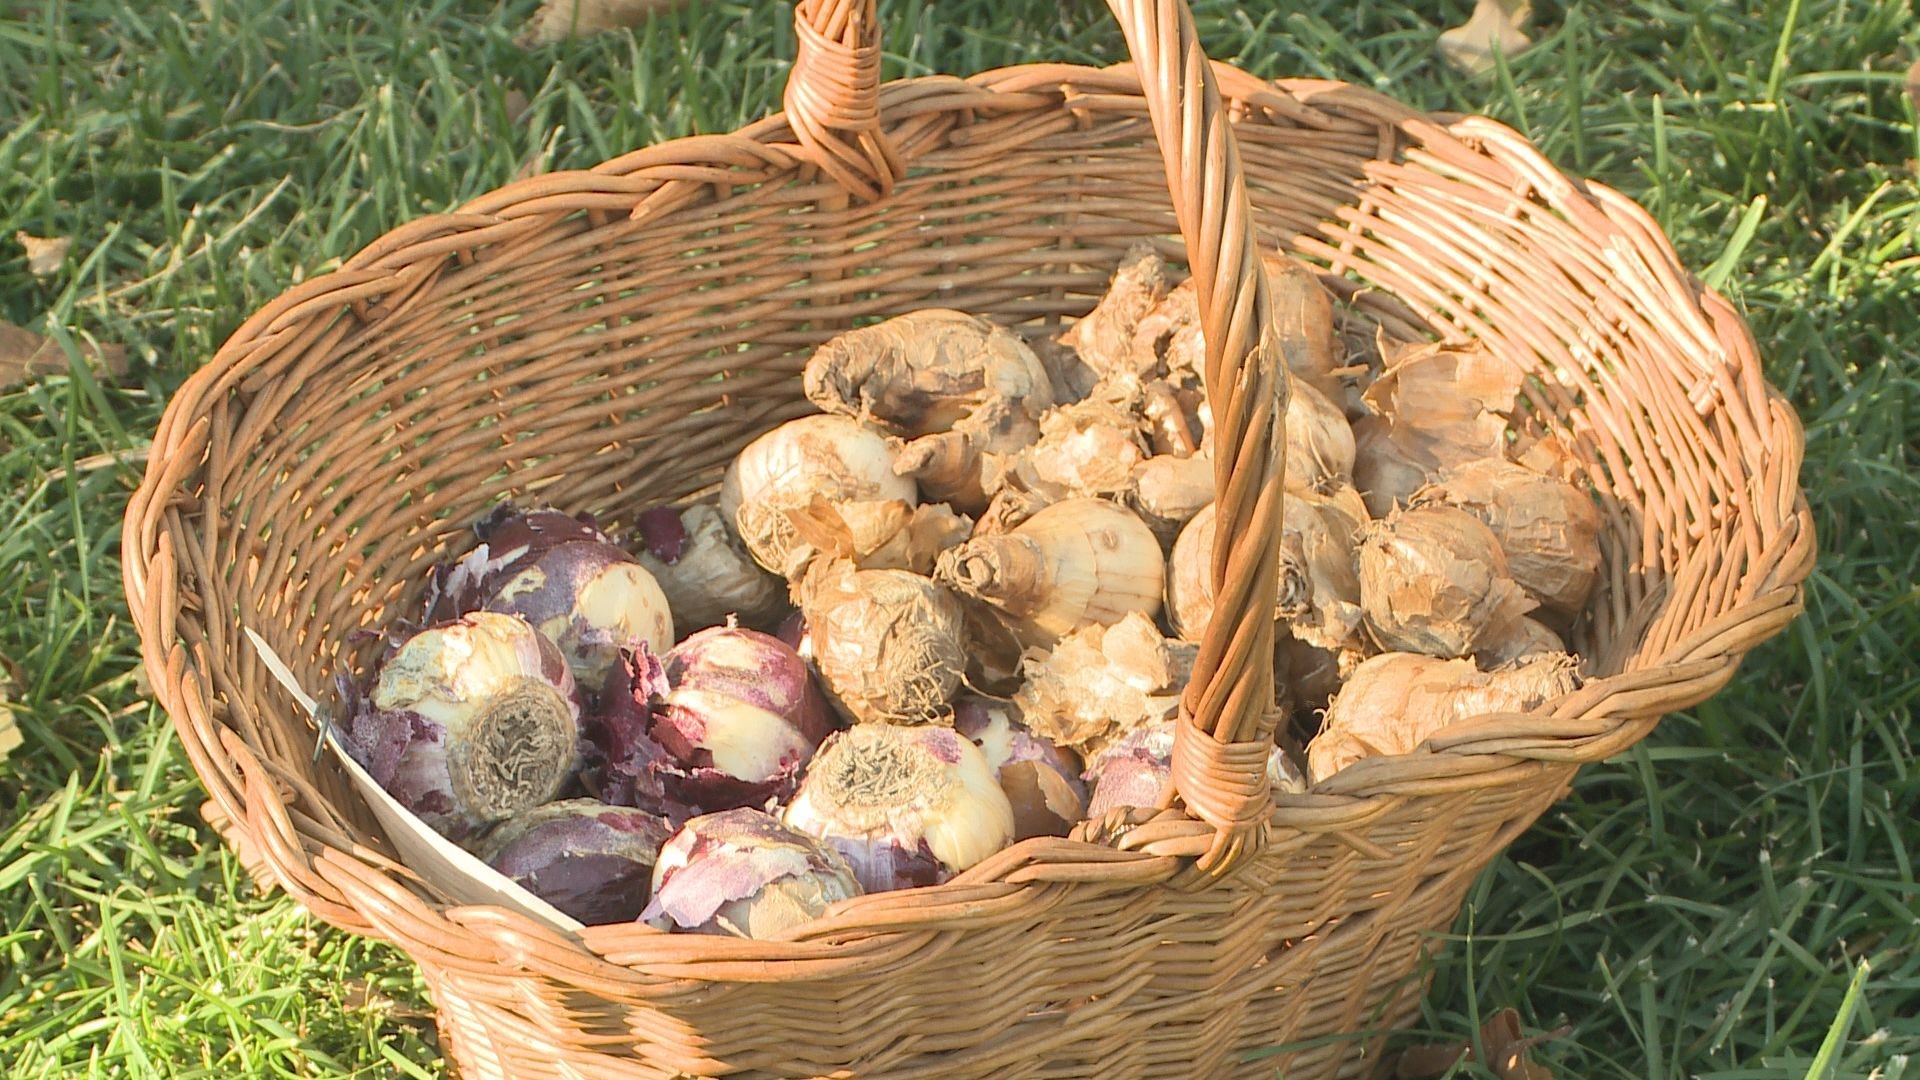 Late fall is when spring bulbs need to be planted. 9NEWS Garden Expert Rob Proctor shows you how.